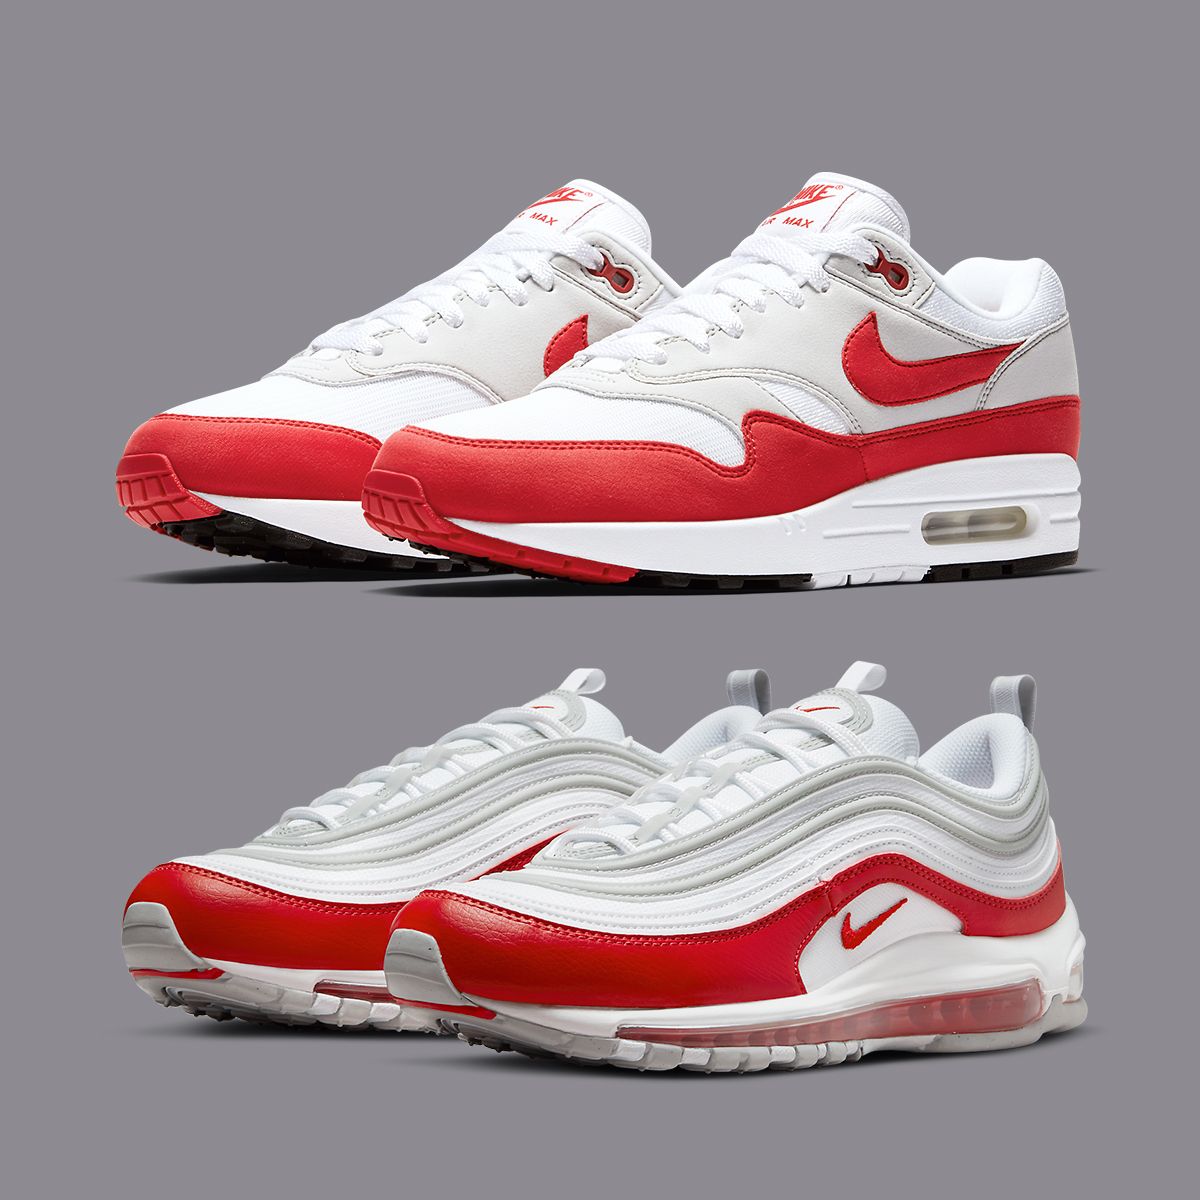 This New Air Max 97 is Inspired by Tinker Hatfield's OG Air Max 1 ... تخزين حمام